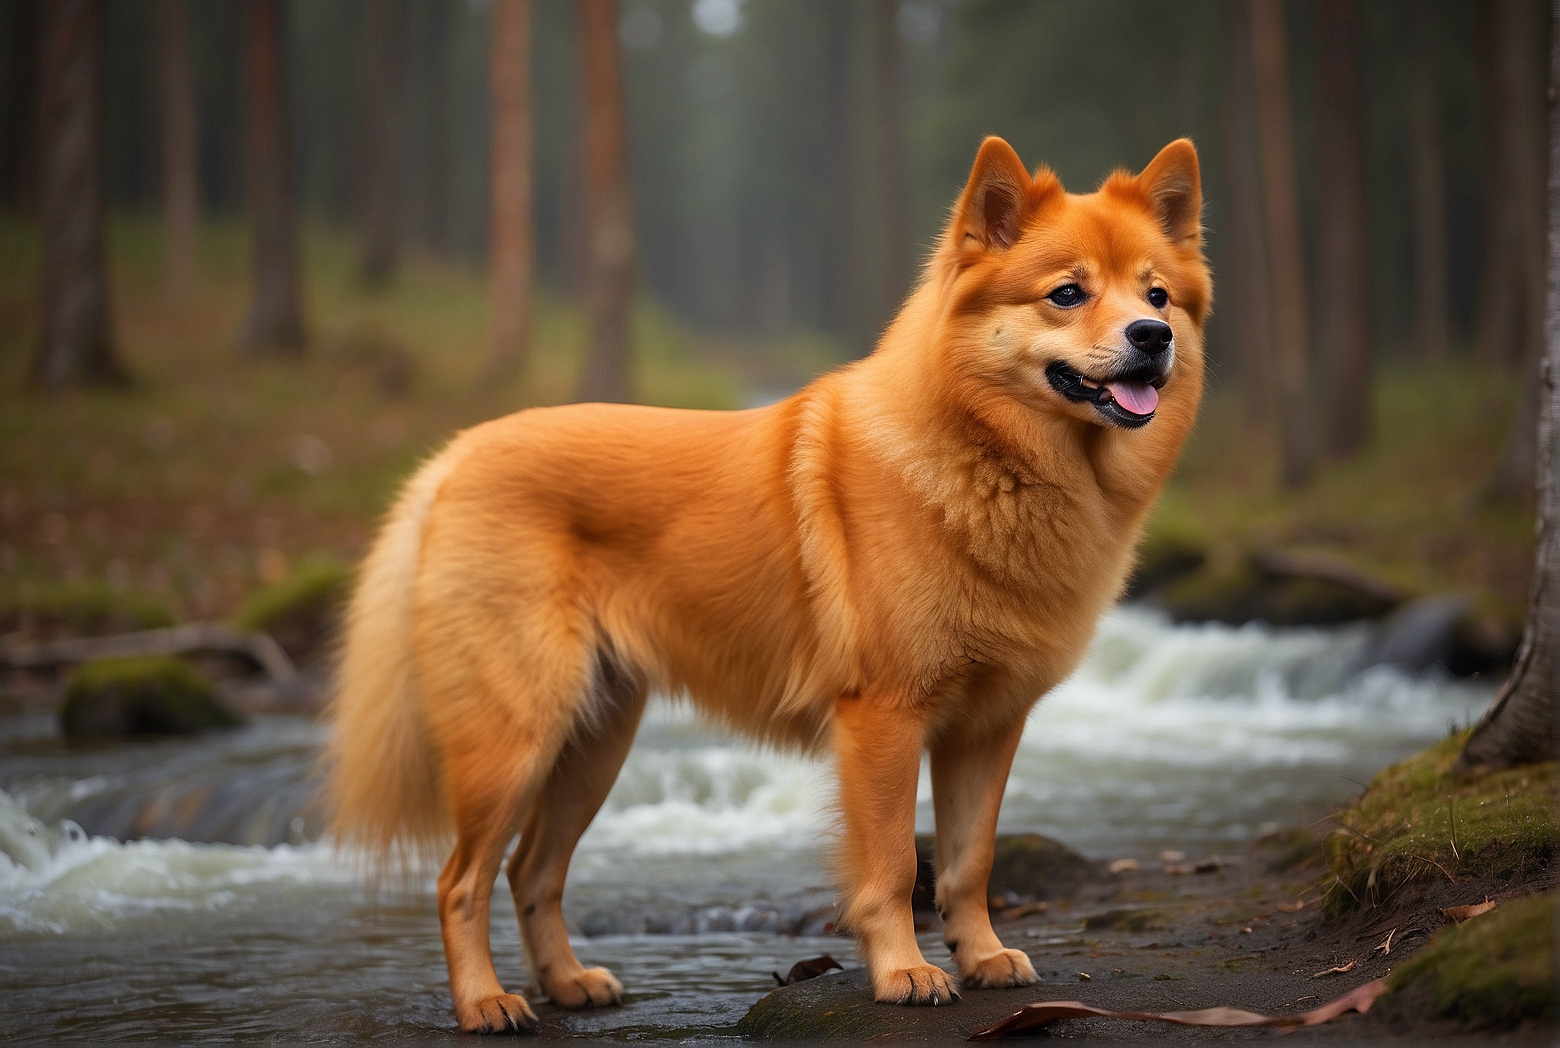 What Does Finnish Spitz Mean